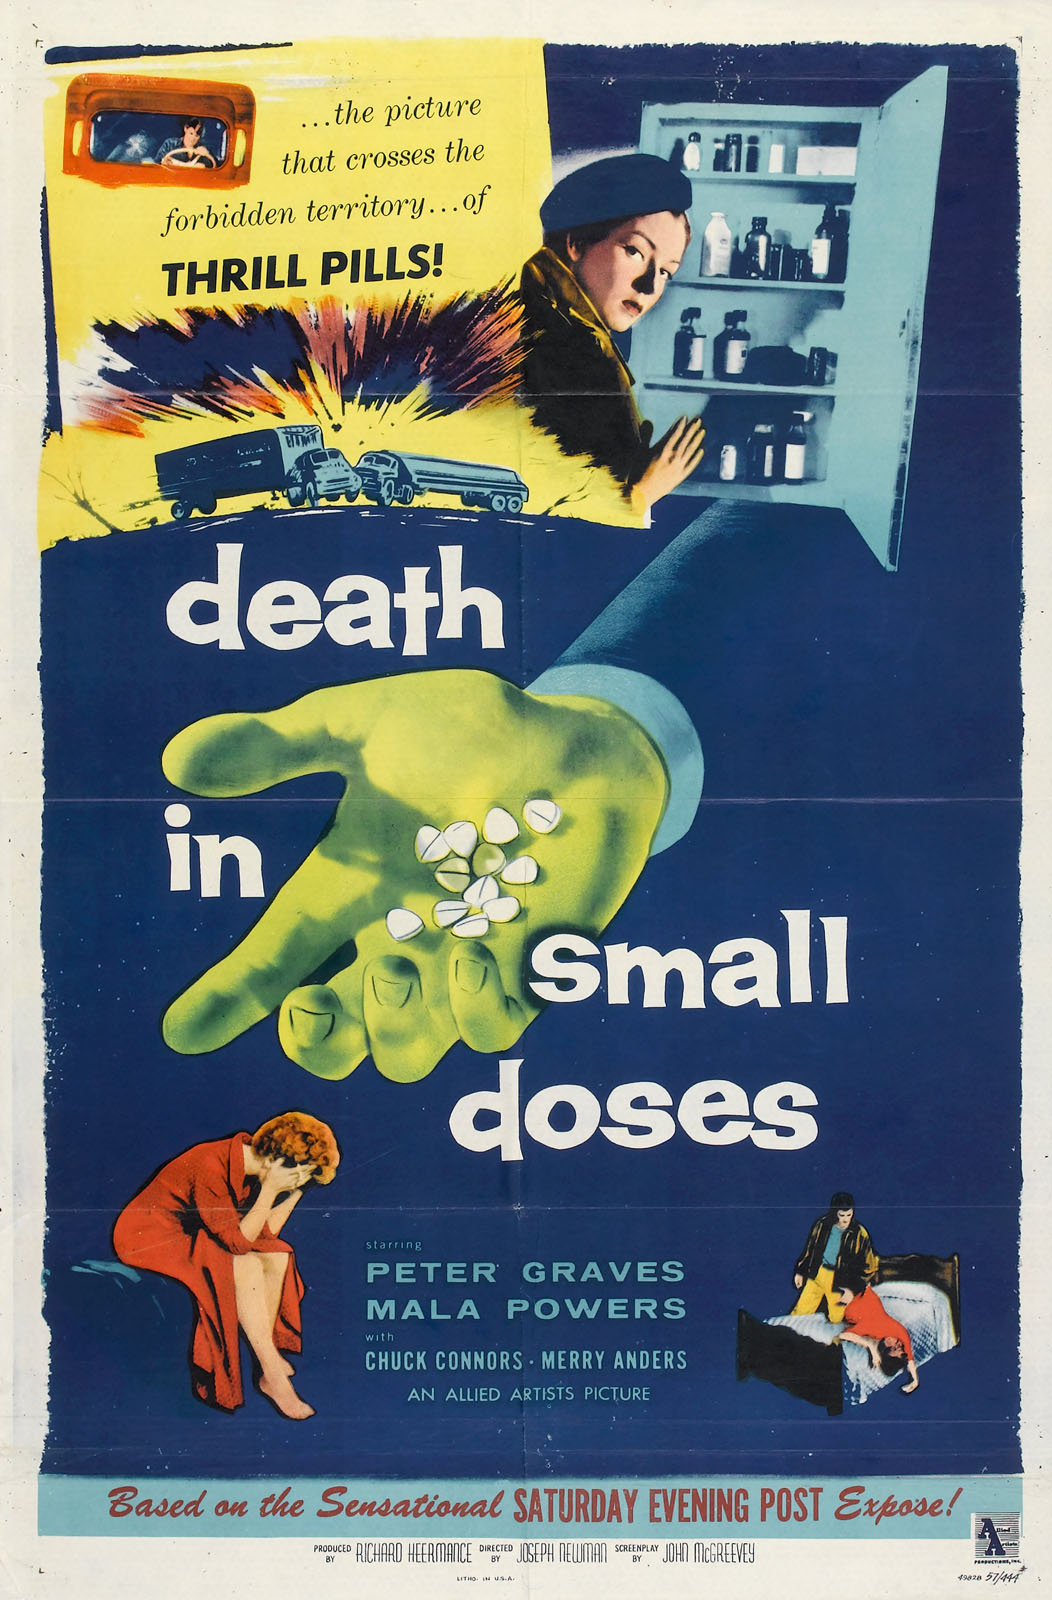 DEATH IN SMALL DOSES